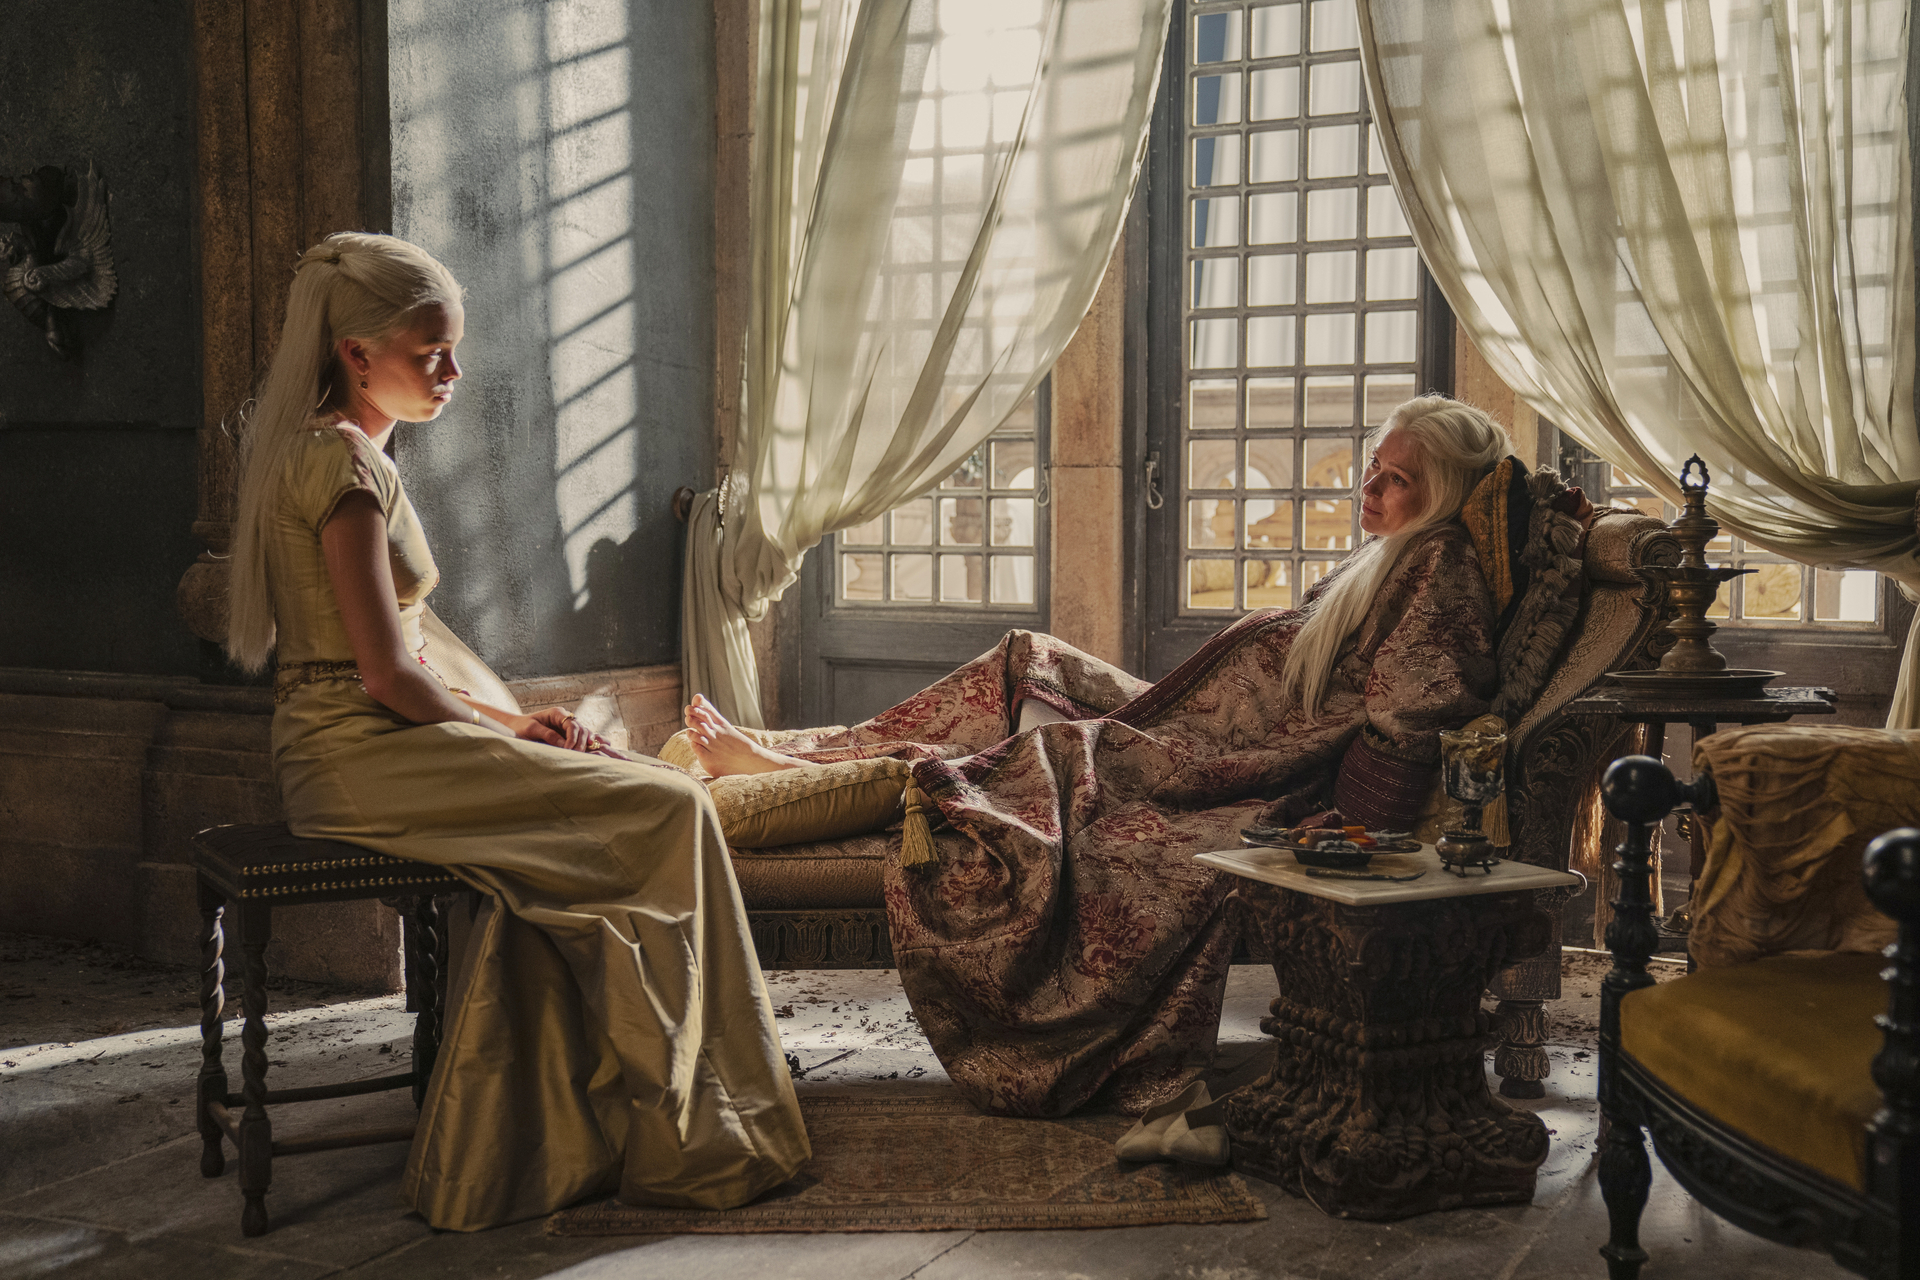 Rhaenyra Targaryen sitting and talking to her mother, who is reclining and very pregnant